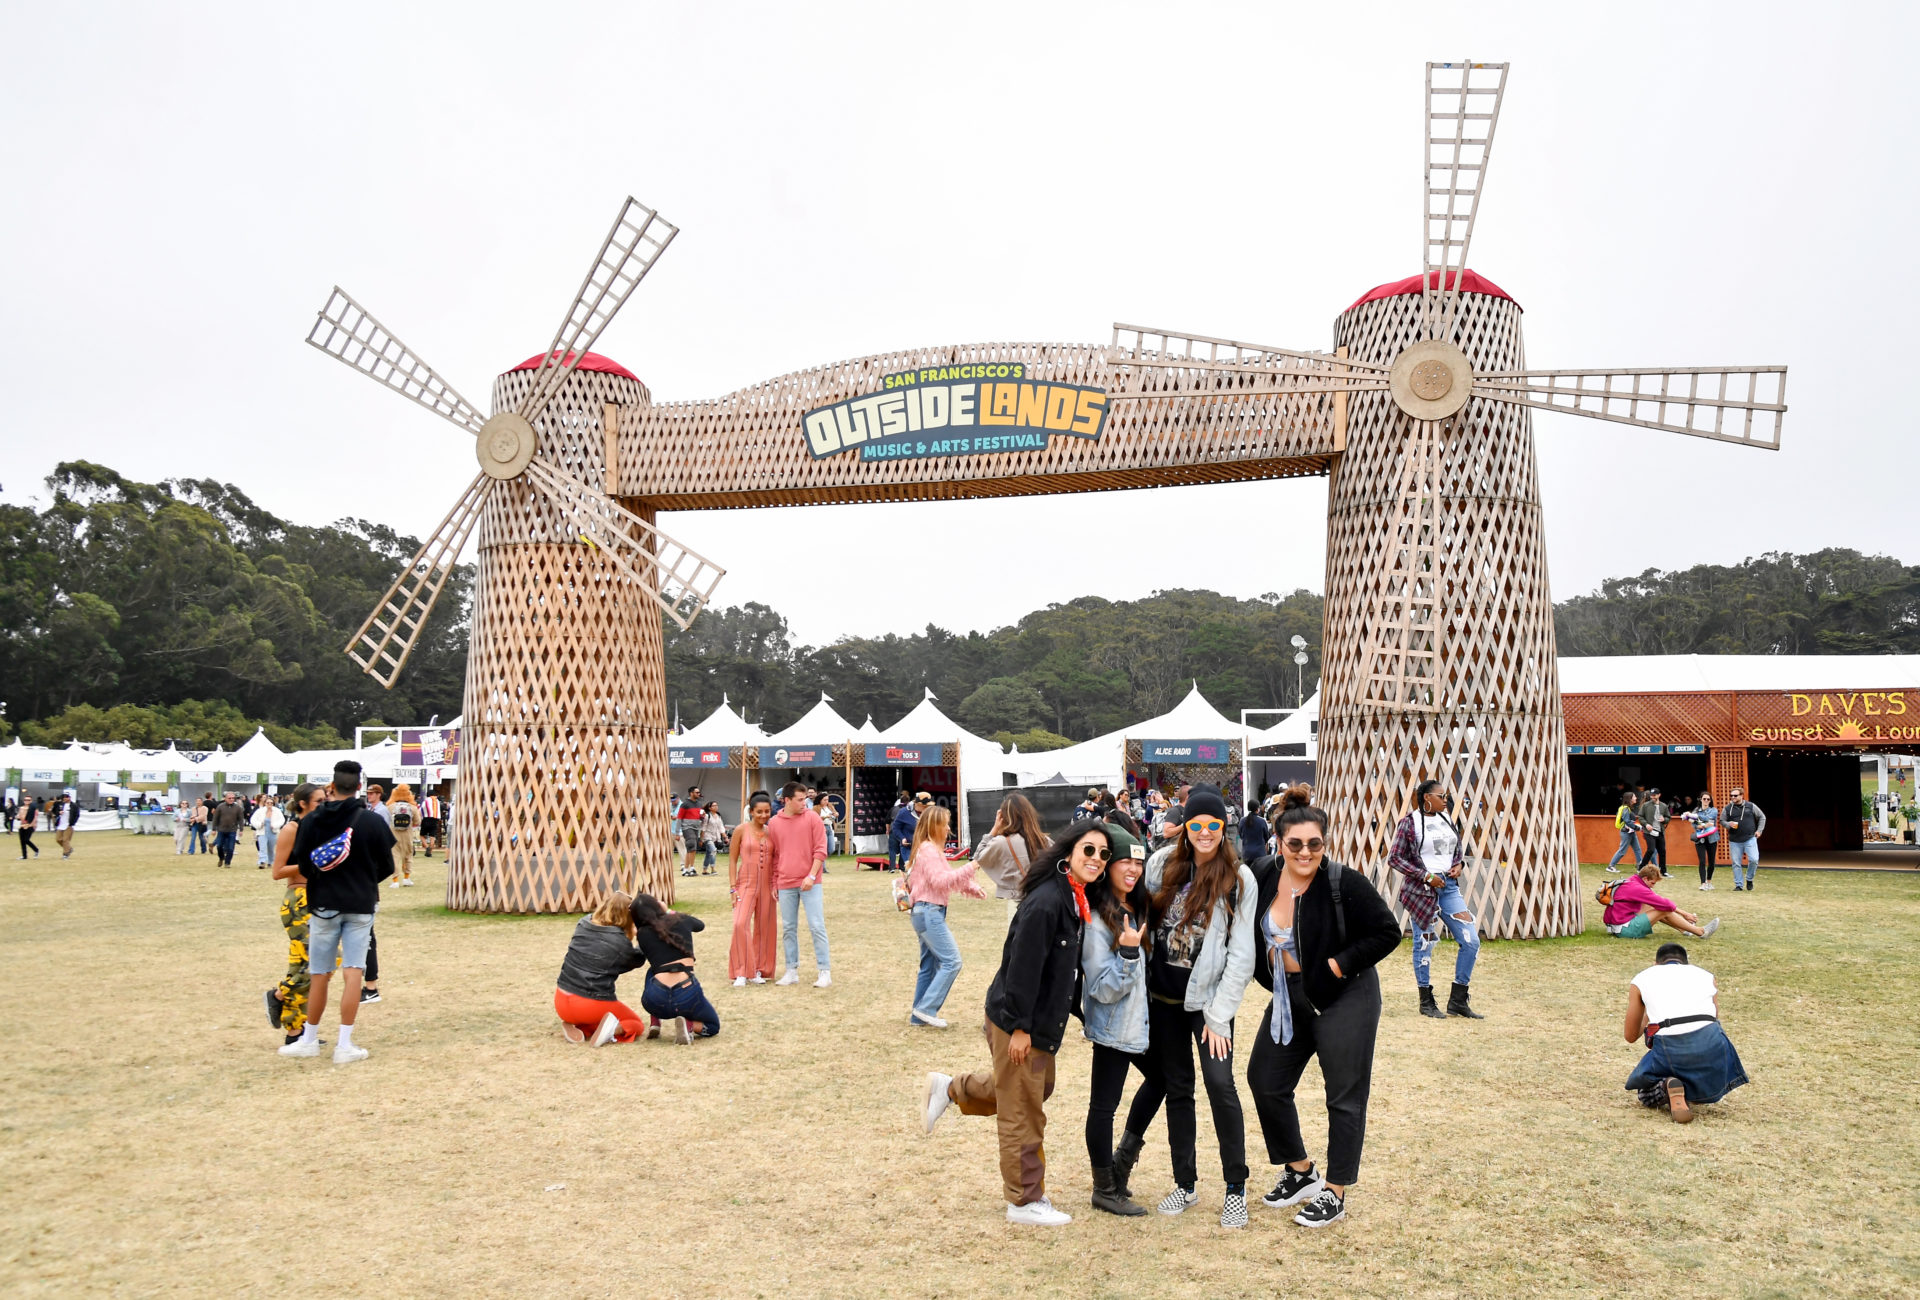 2018 Outside Lands Music And Arts Festival - Atmosphere - Day 3